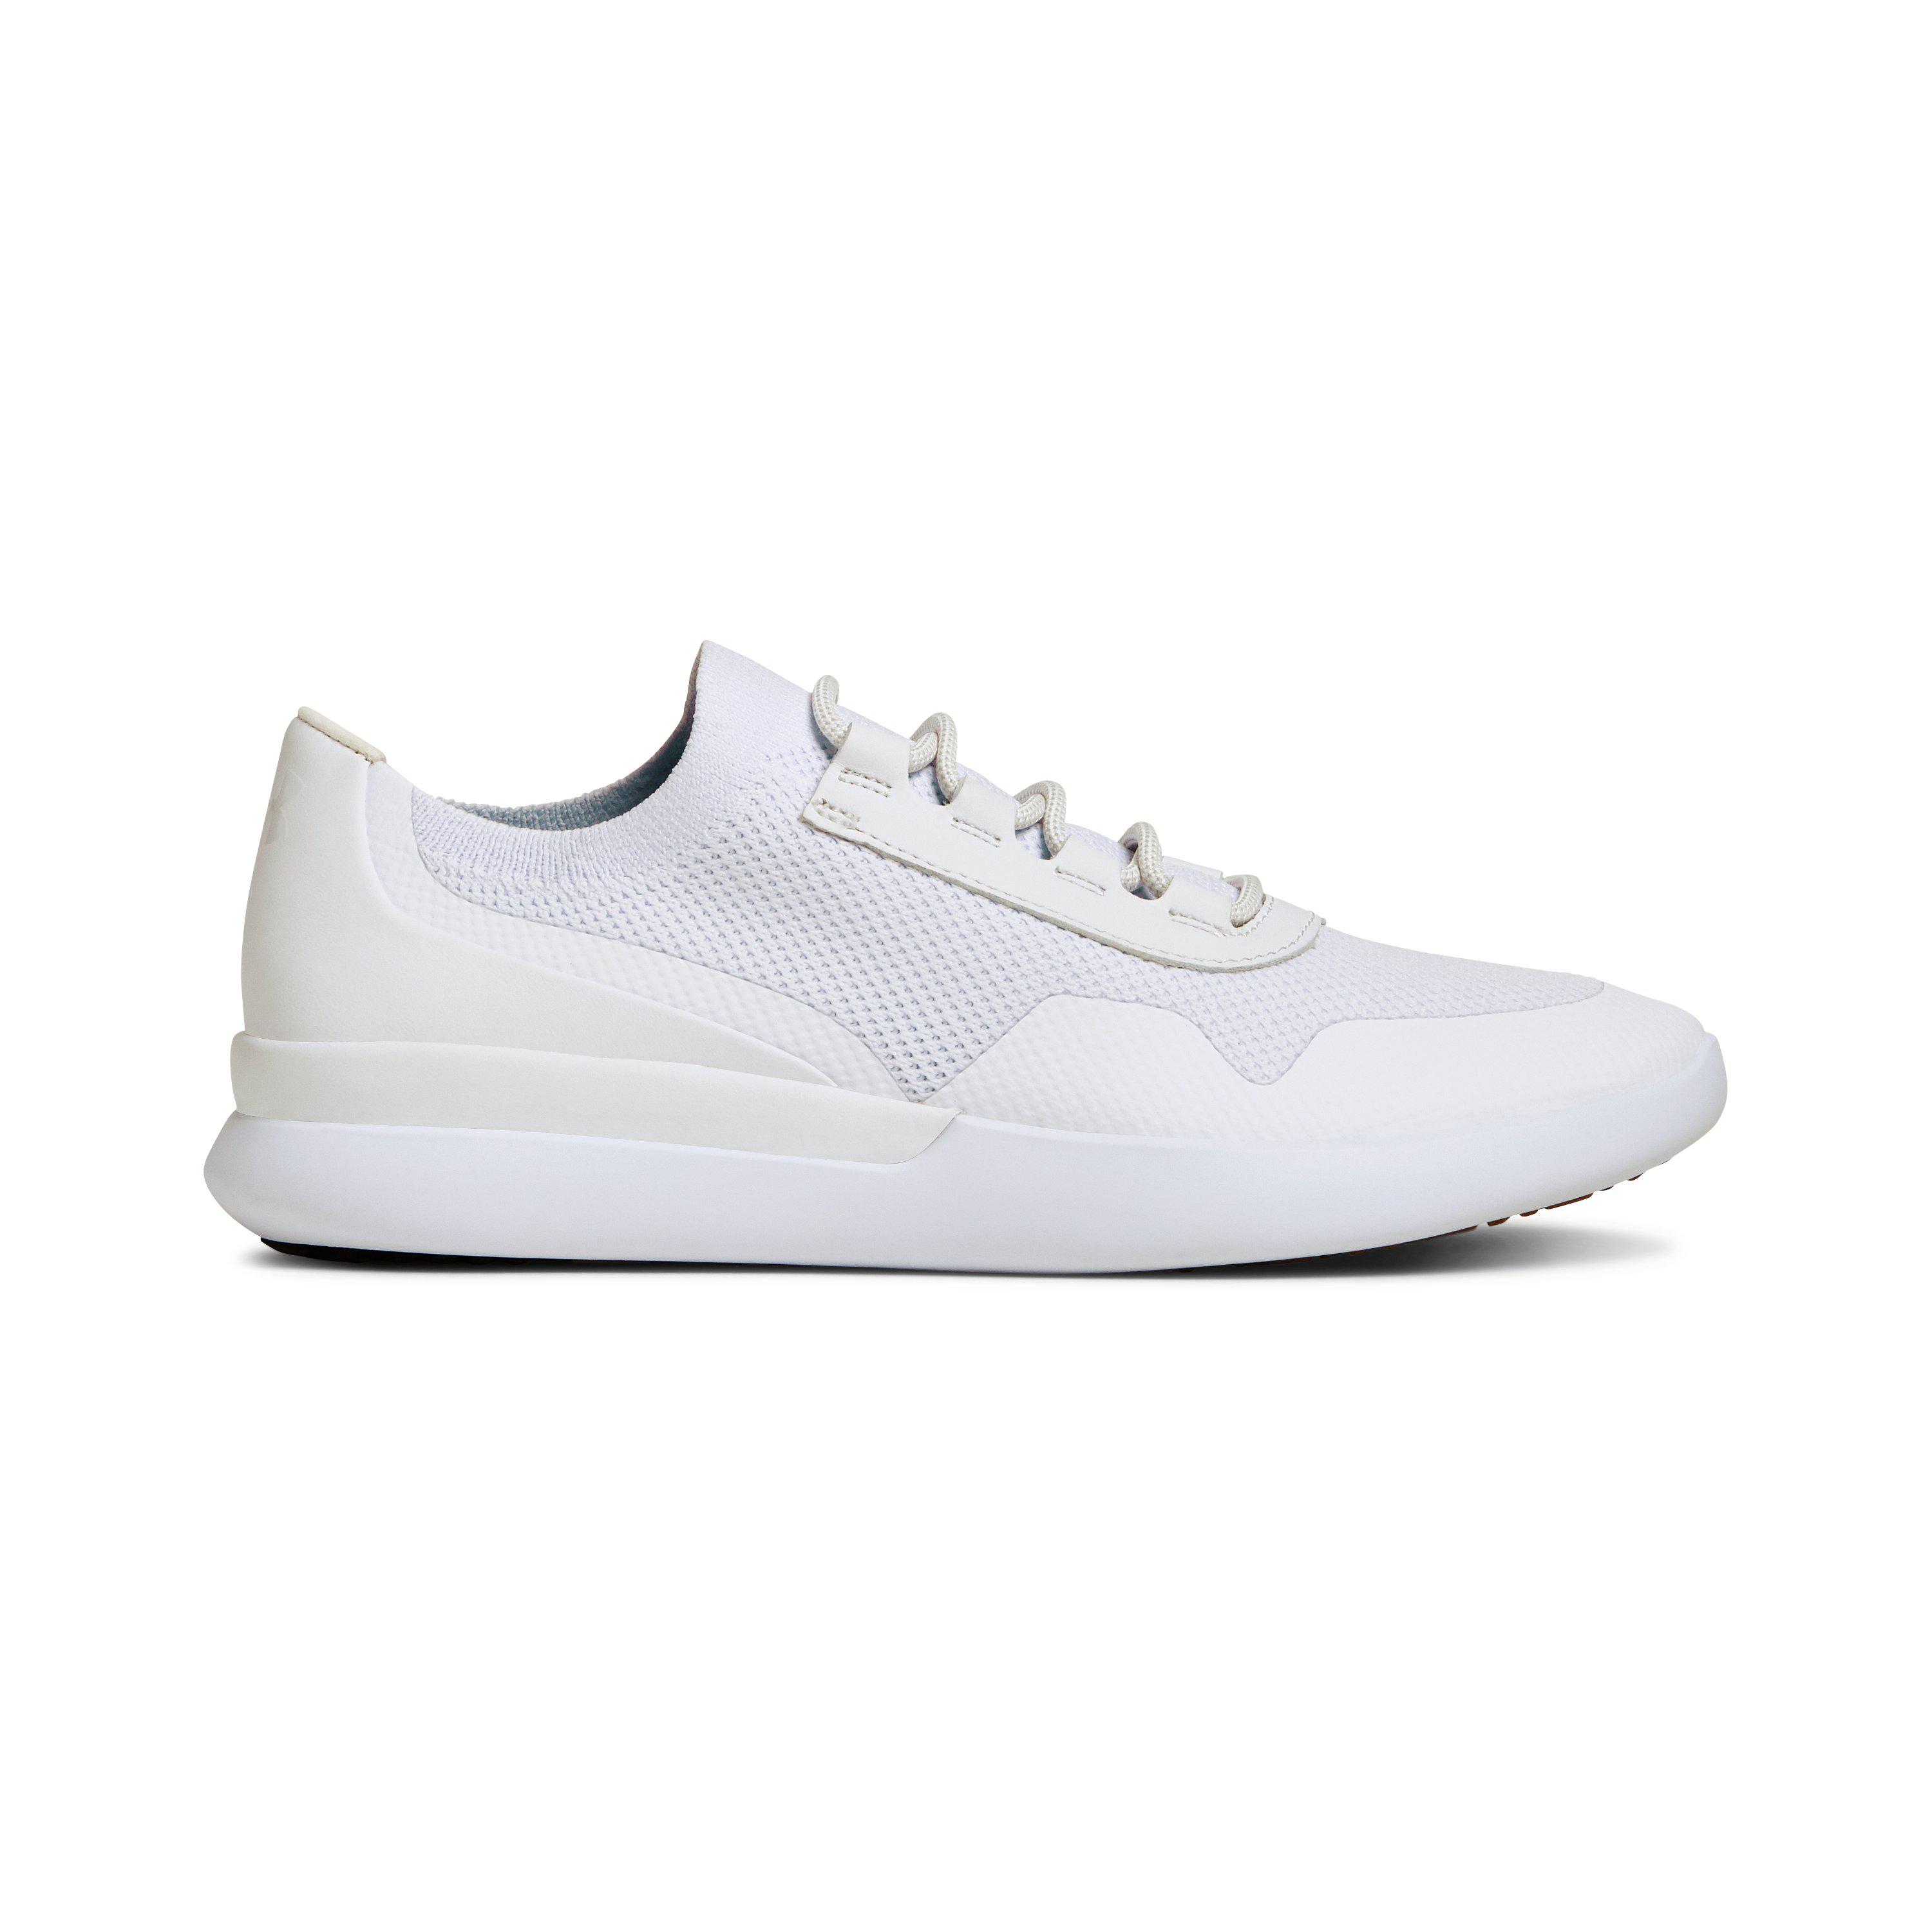 under armour white leather shoes Online 